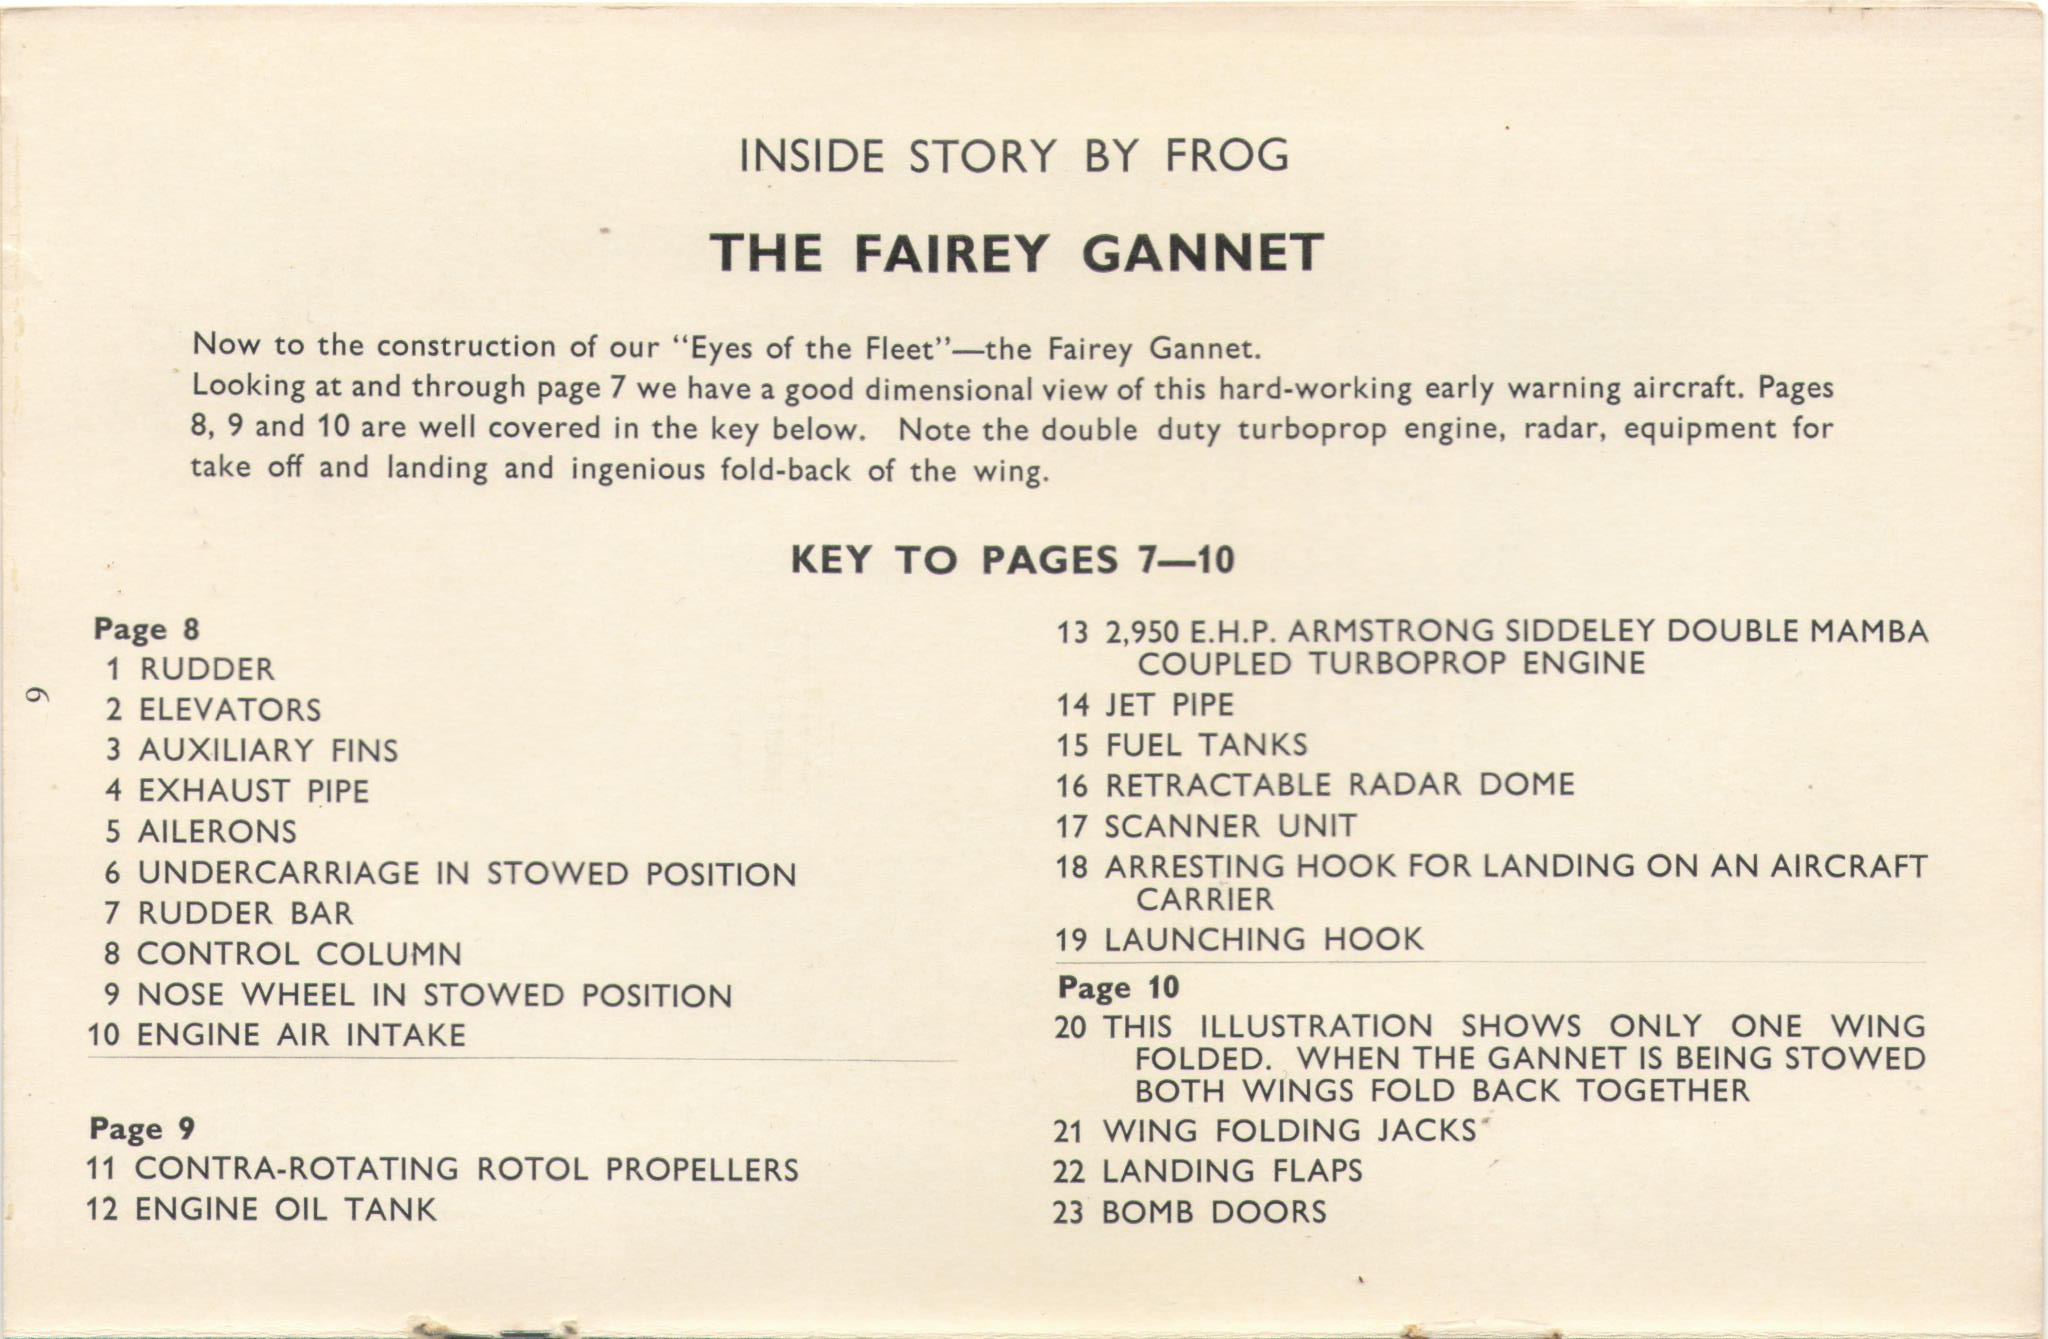 inside story FROG The Attackers Series F145 Fairey Gannet, IMA Ltd, 1965, Key to Inside story